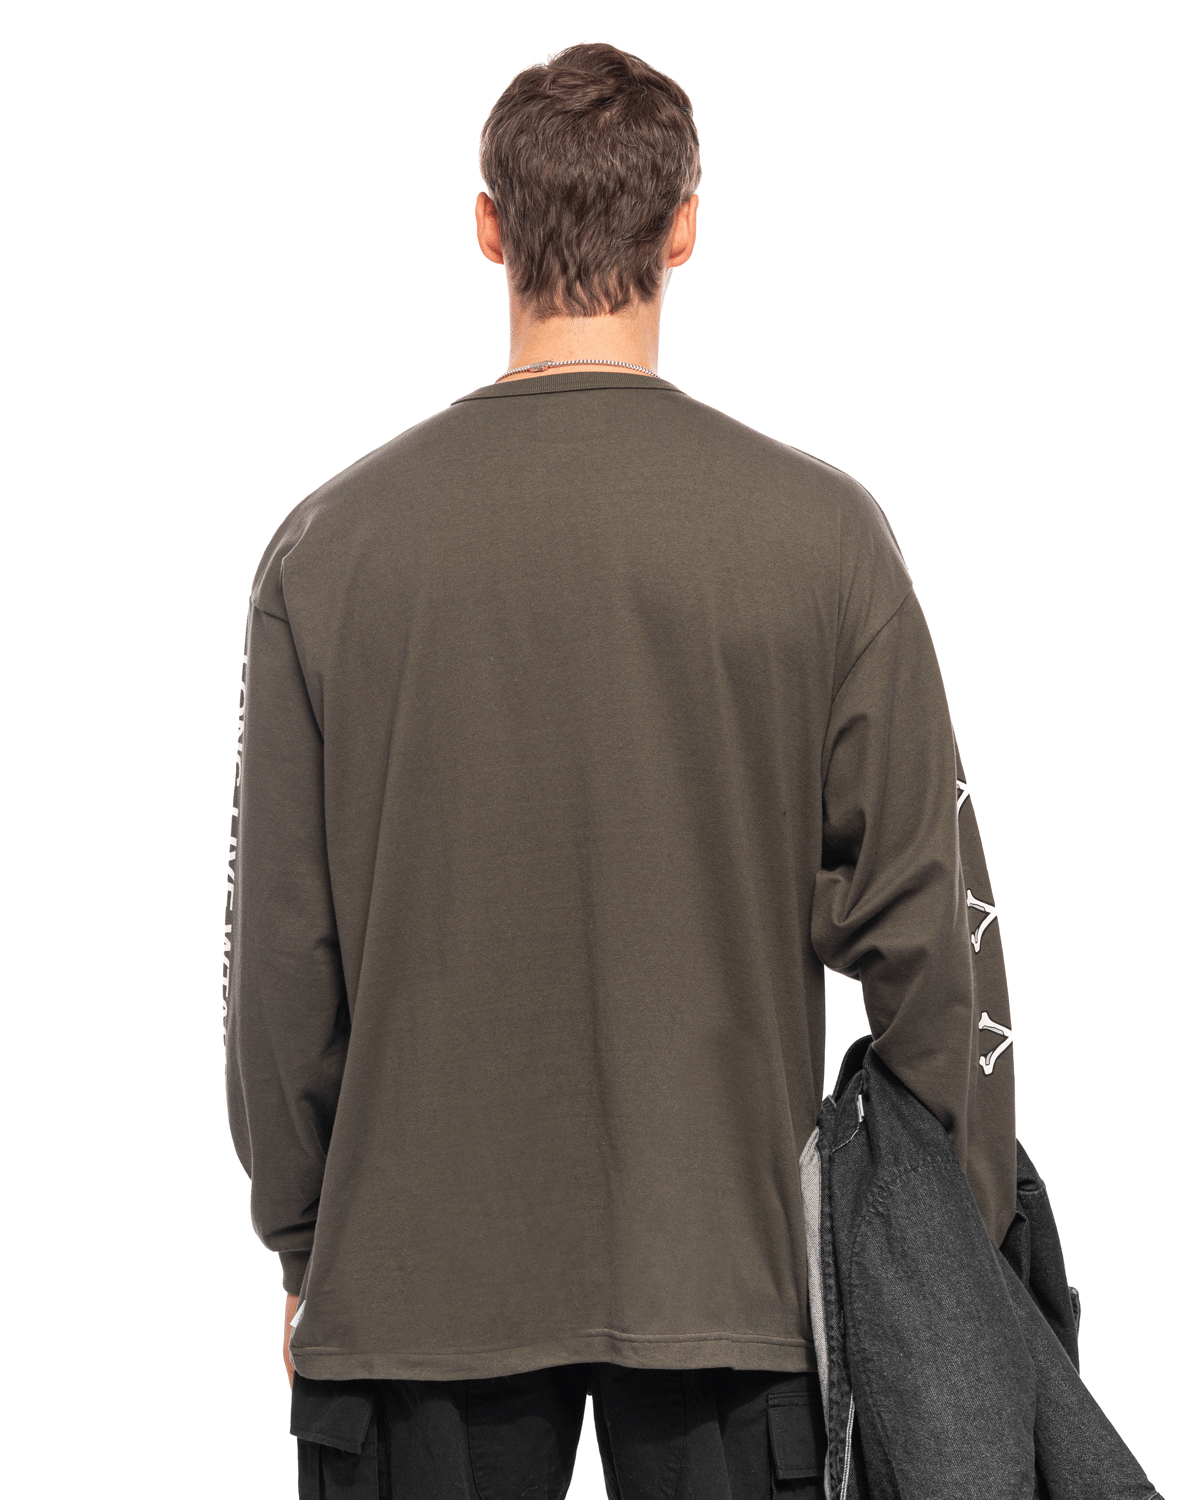 LXLXW / LS / COTTON Long Sleeve Tee Olive Drab